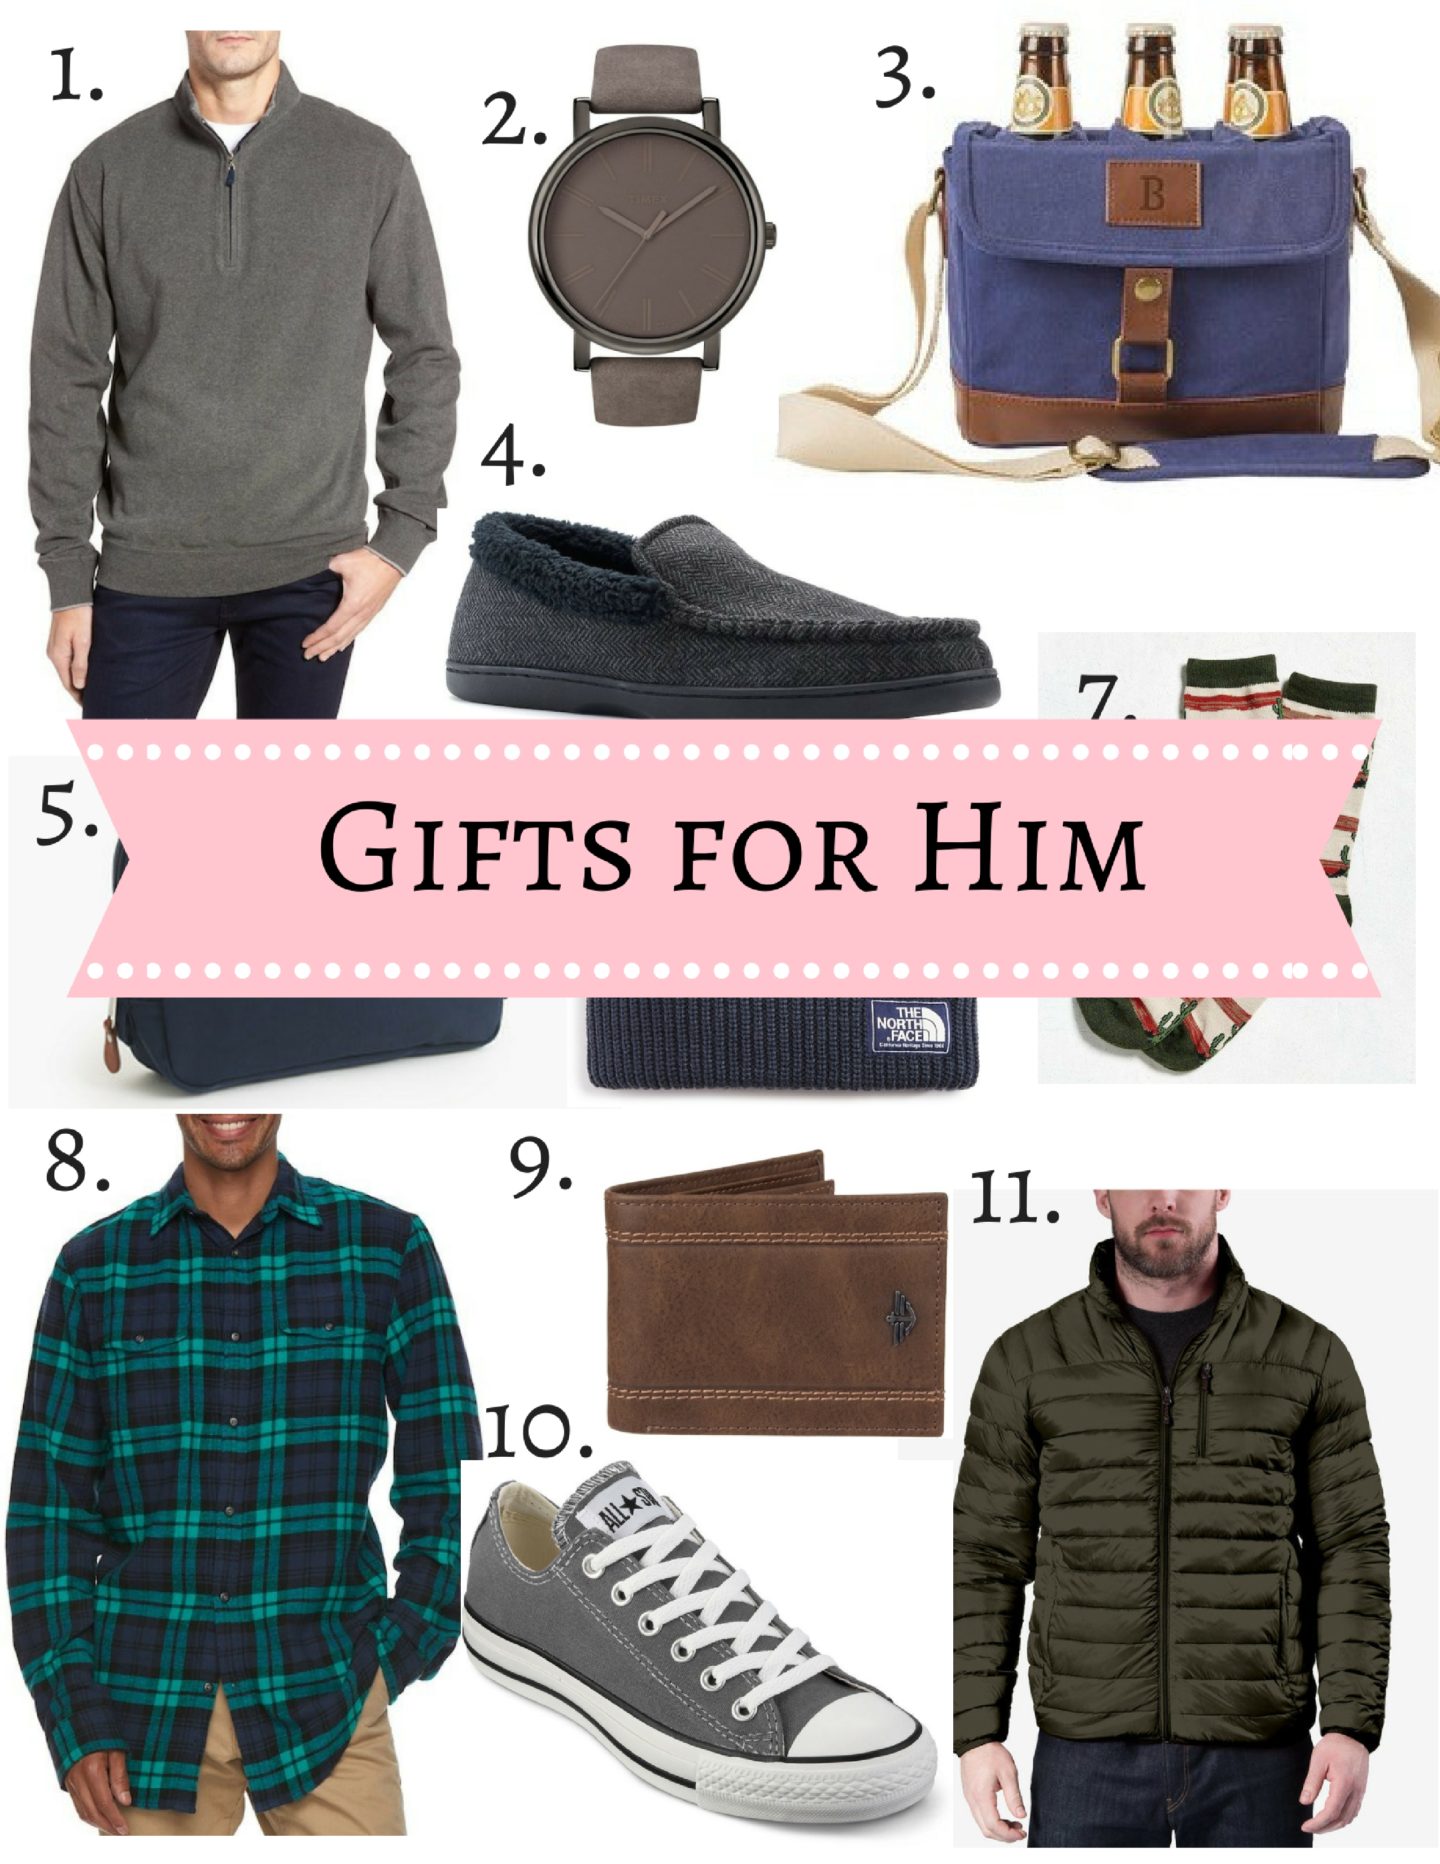 Men’s Gift Ideas: Gift Guide for Him (Dad, Brother, Boyfriend, Friend, Family Member)